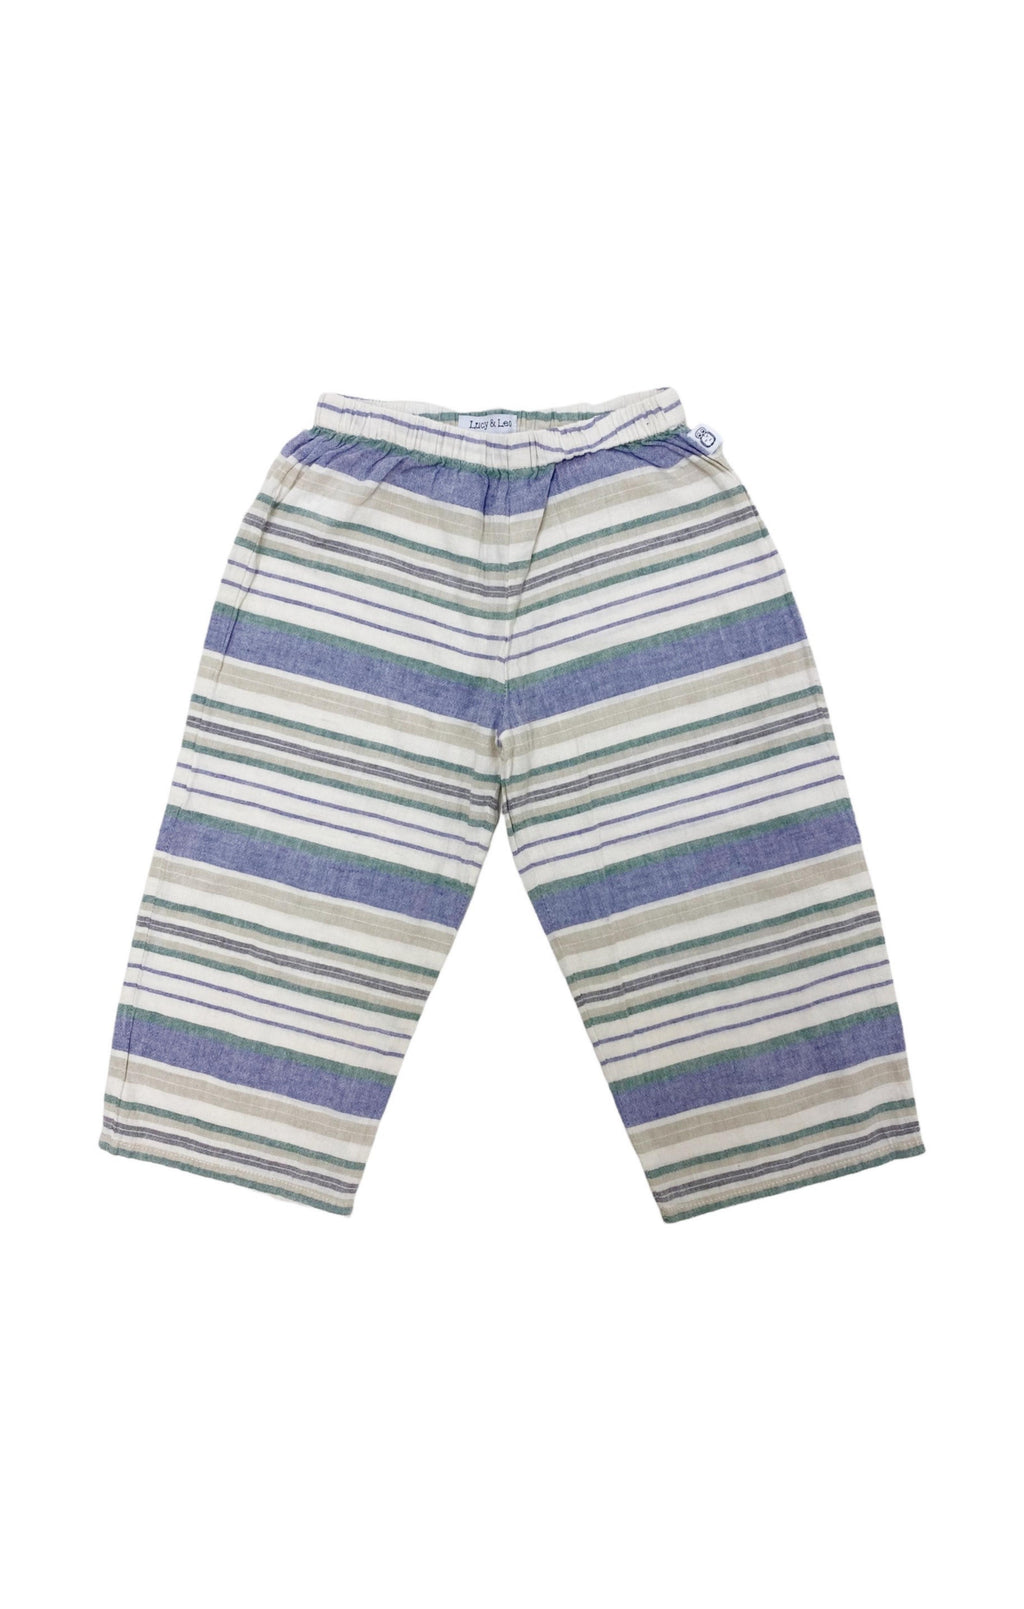 LUCY & LEO Pants Size: 5T